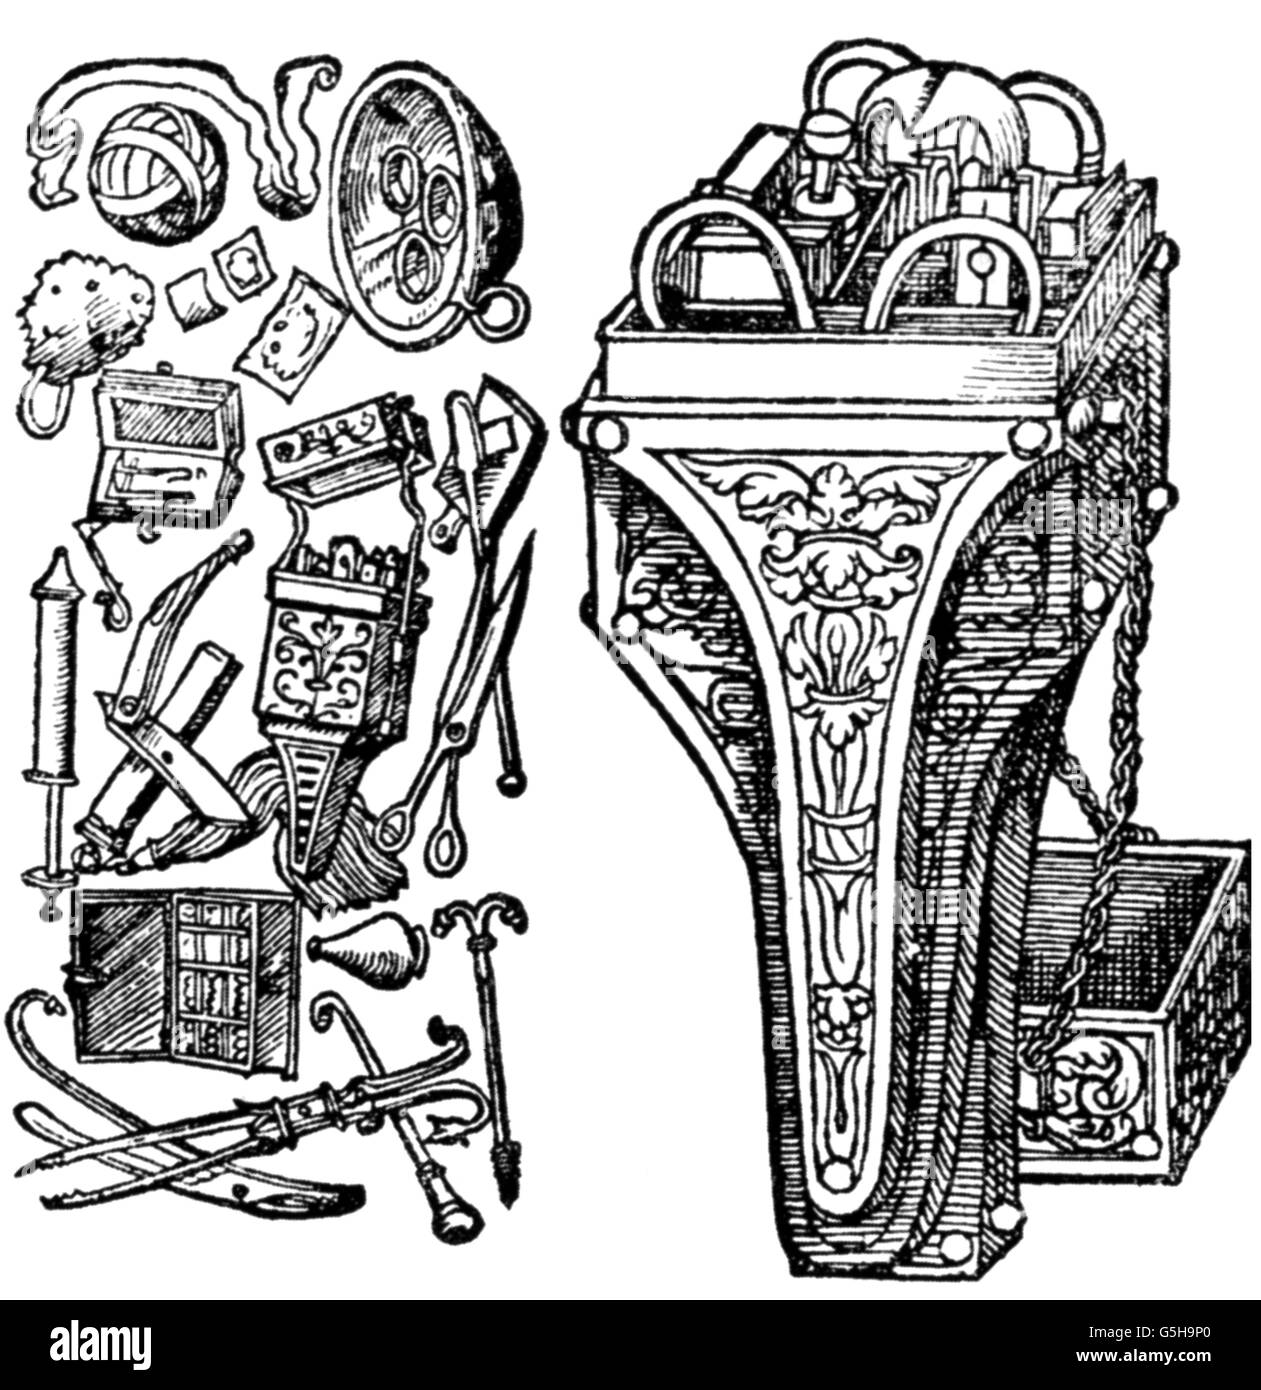 medicine, instruments / equipment, instruments with bag, woodcut by Jost Amman (1539 - 1591) for an oevre by Paracelsus, 16th century, 16th century, graphic, graphics, operation, undergo surgery, need surgery, a pair of scissors, shears, knife, knives, syringe, syringes, sponge, sponges, bandage, container, containers, instrument bag, instrument bags, object, objects, stills, scalpel, scalpels, medicine, medicines, devices, device, instrument, instruments, woodcut, woodcuts, historic, historical, Additional-Rights-Clearences-Not Available Stock Photo